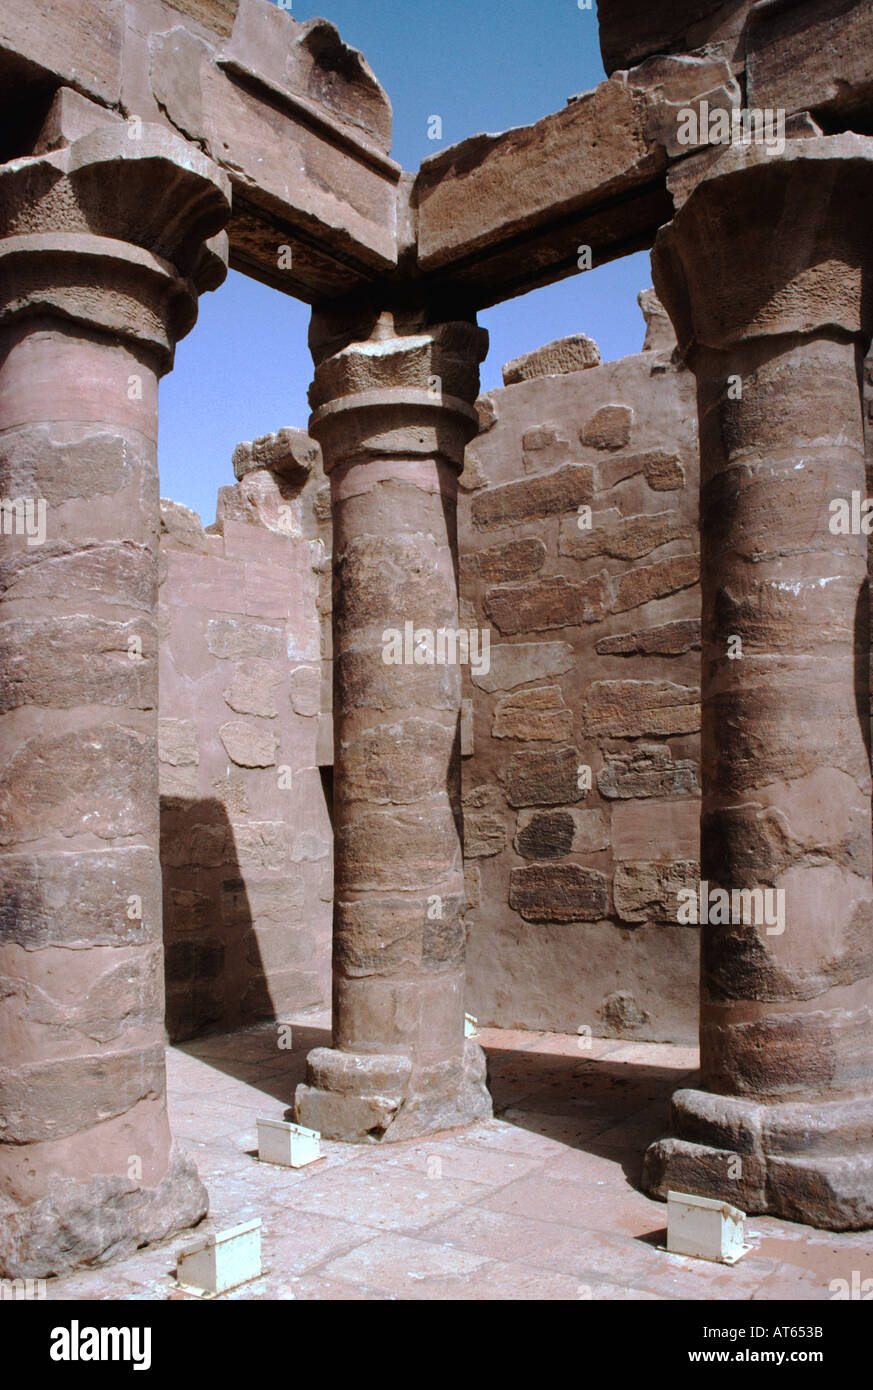 Columns in the courtyard. Maharraq Temple, New Sebua, Upper Egypt, Egypt. The temple was built by Augustus during the Ptolemaic period. Stock Photo